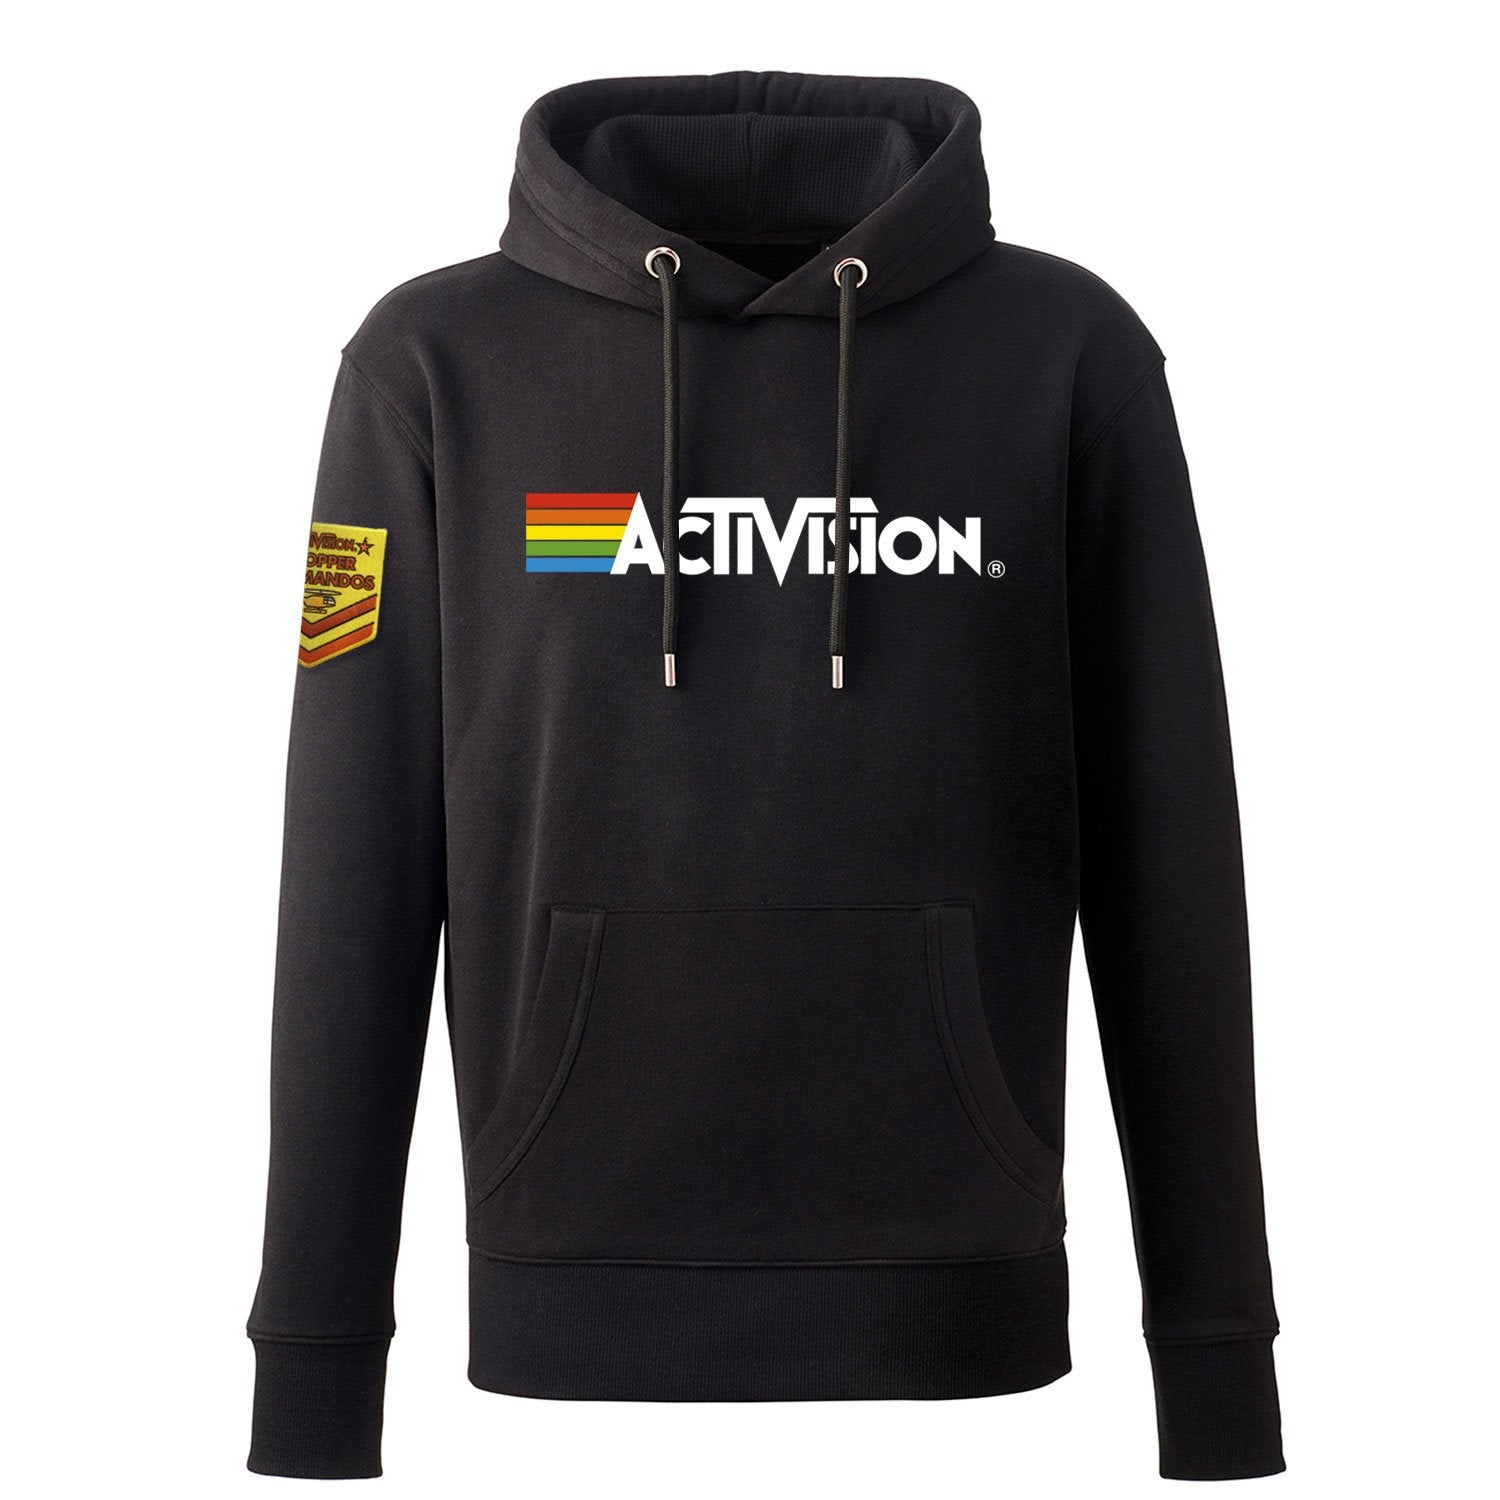 Chopper Commandos Patch, Activision Logo Men's Hoody, Black Pullover in Unisex Fit with Kangaroo Pocket